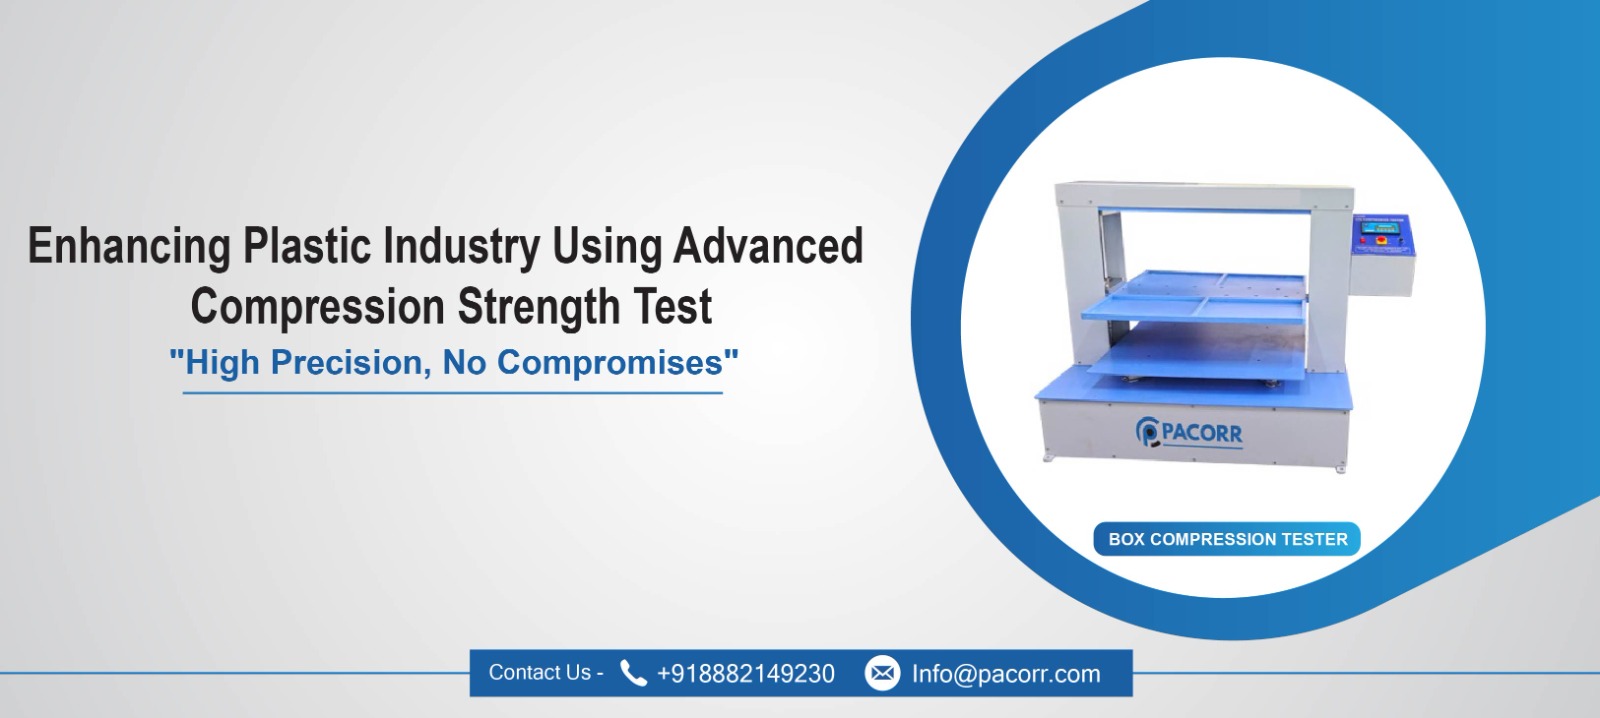 Enhancing Plastic Industry Using Advanced Compression Strength Test